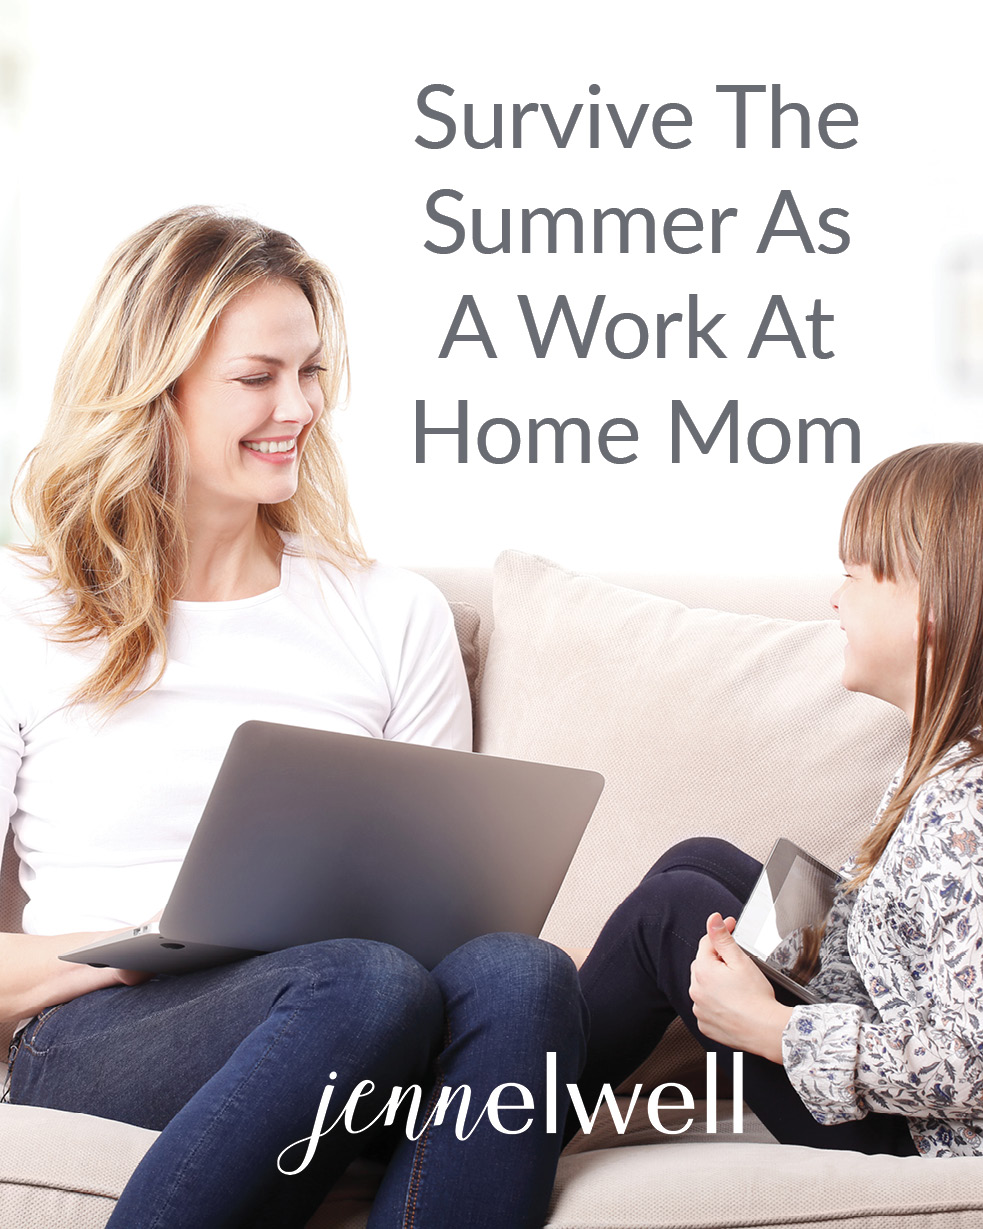 Survive The Summer As A Work At Home Mom - Jenn Elwell